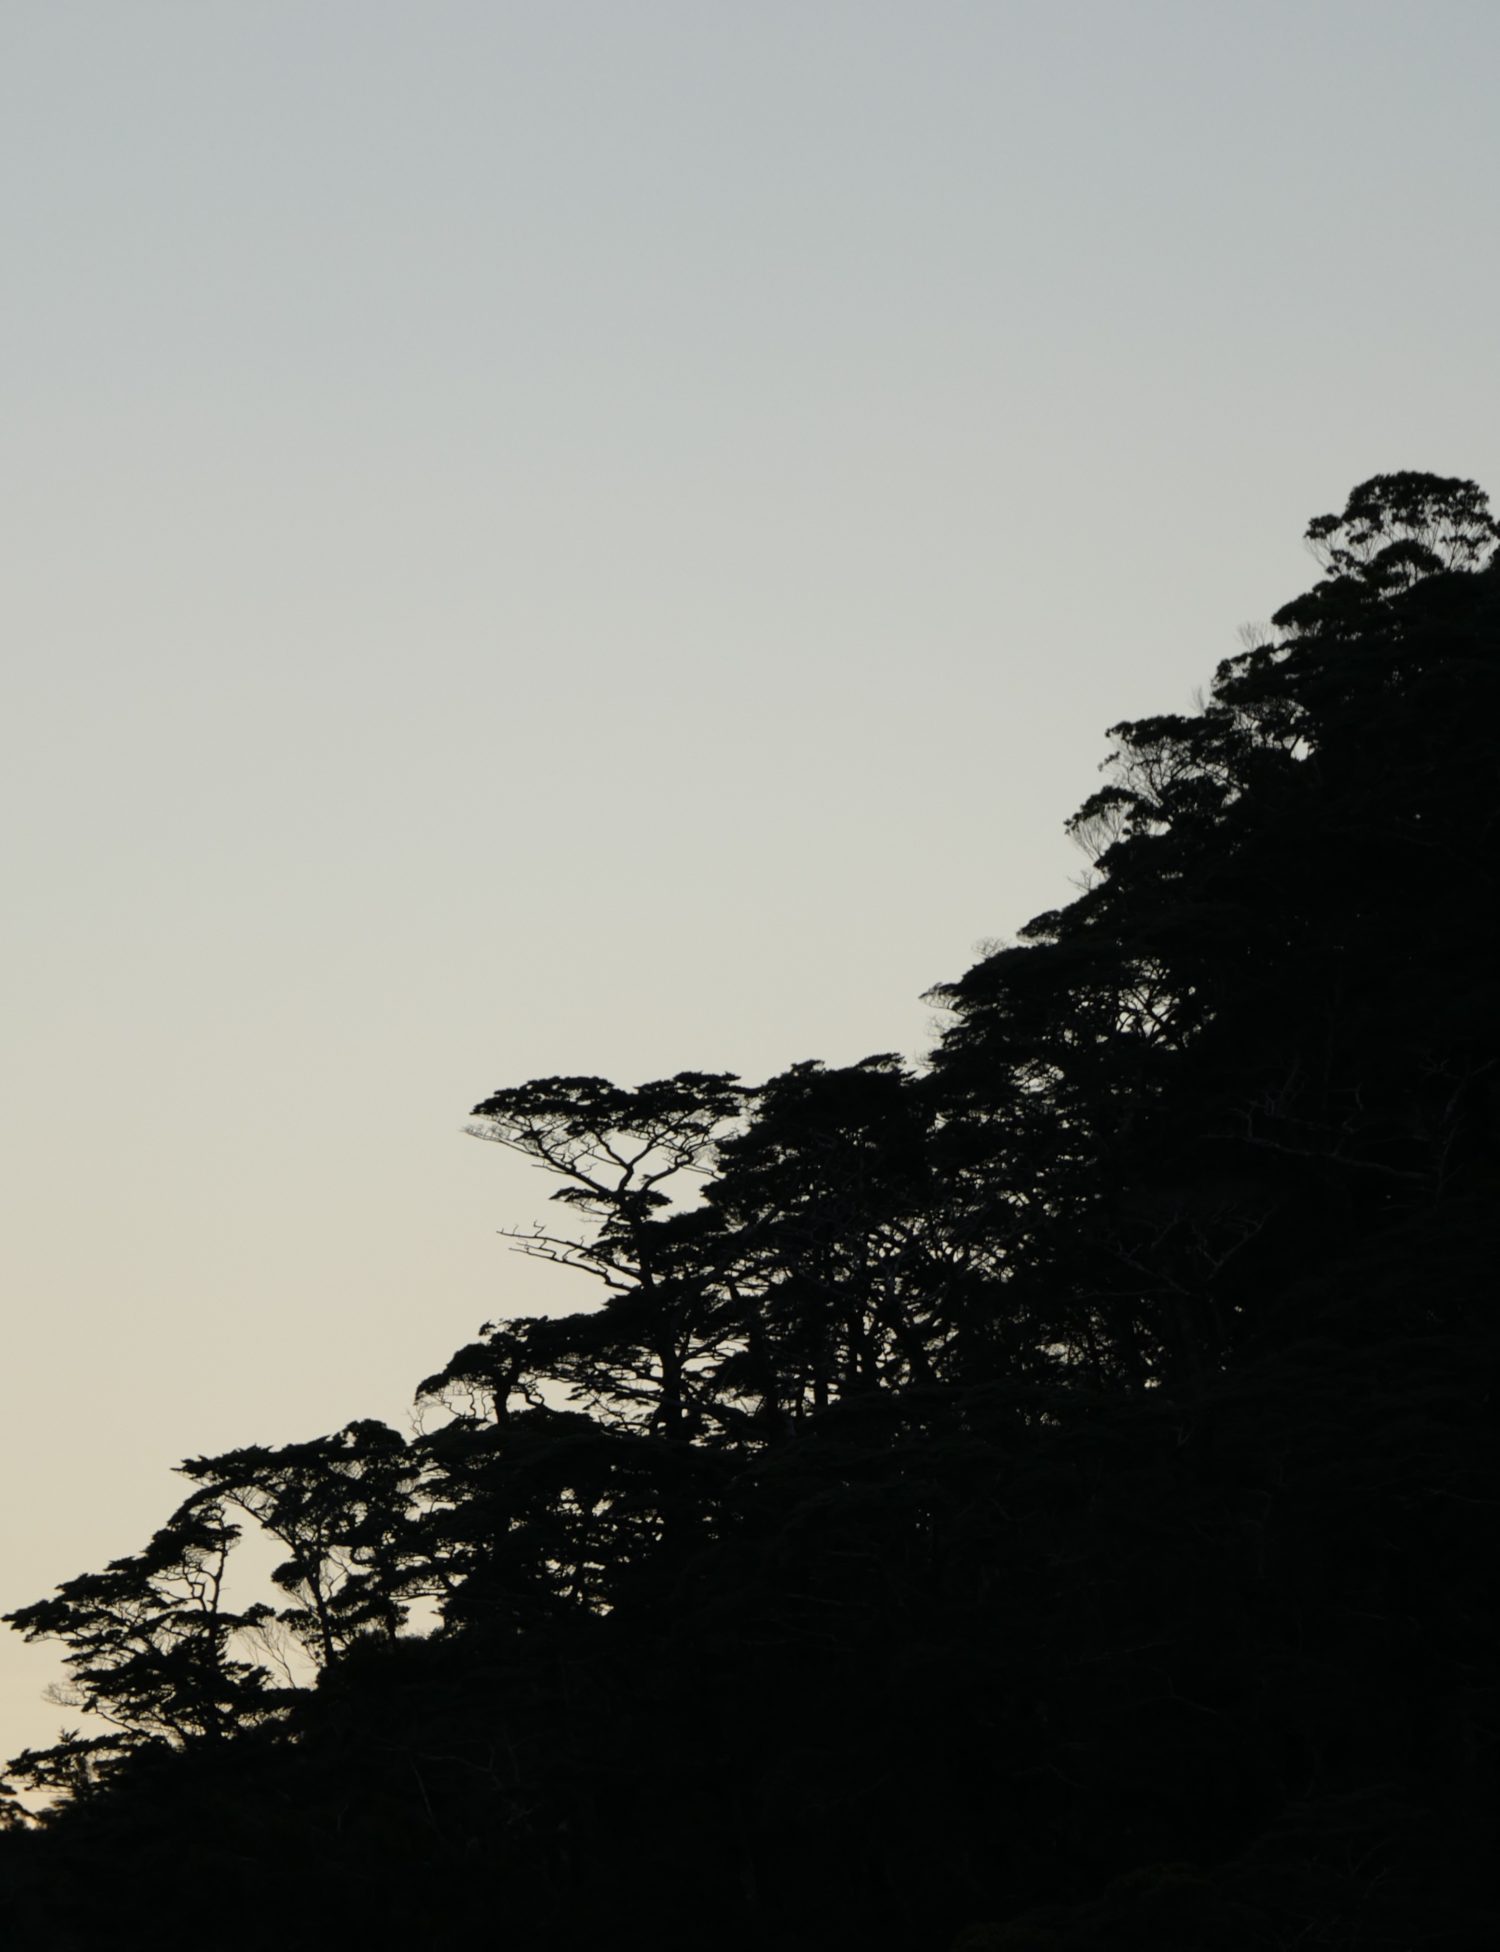 "Catastrophe Forest", dusk-silhouetted. All photos copyright Doug Spencer.